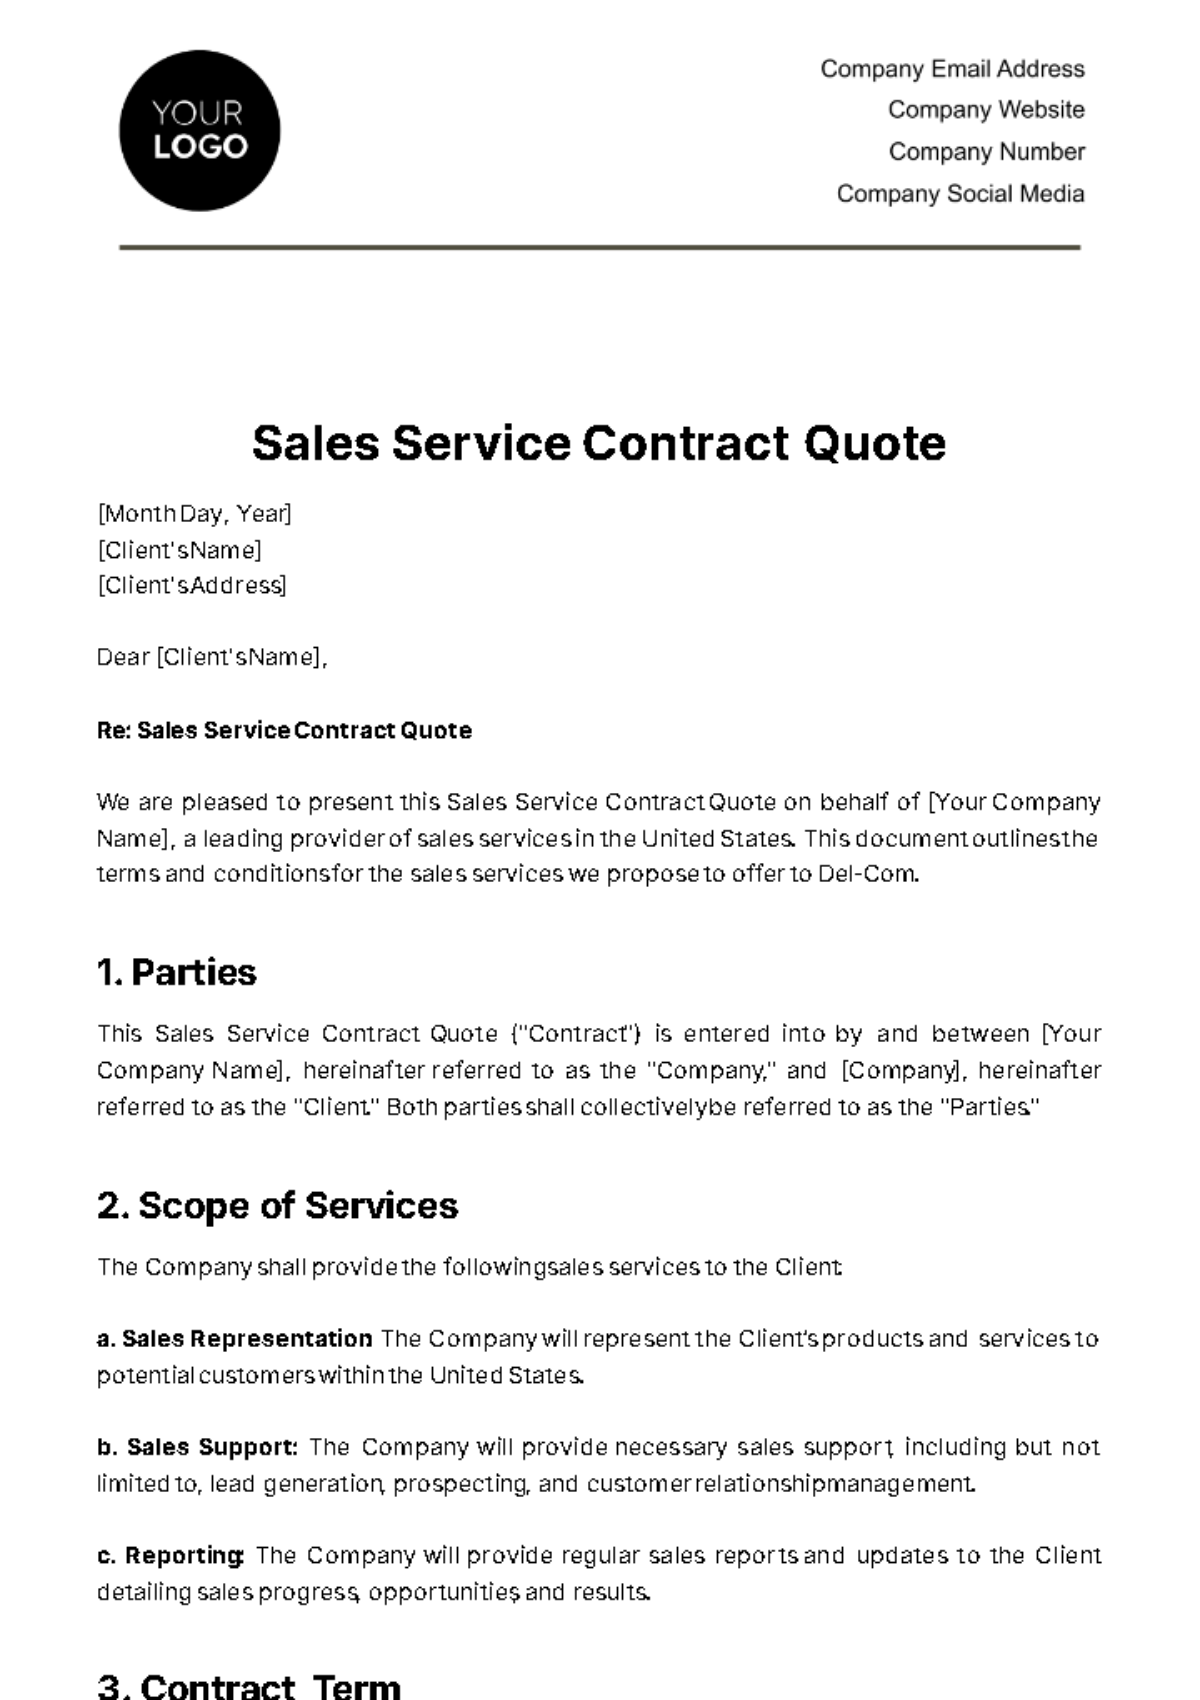 Free Sales Service Contract Quote Template